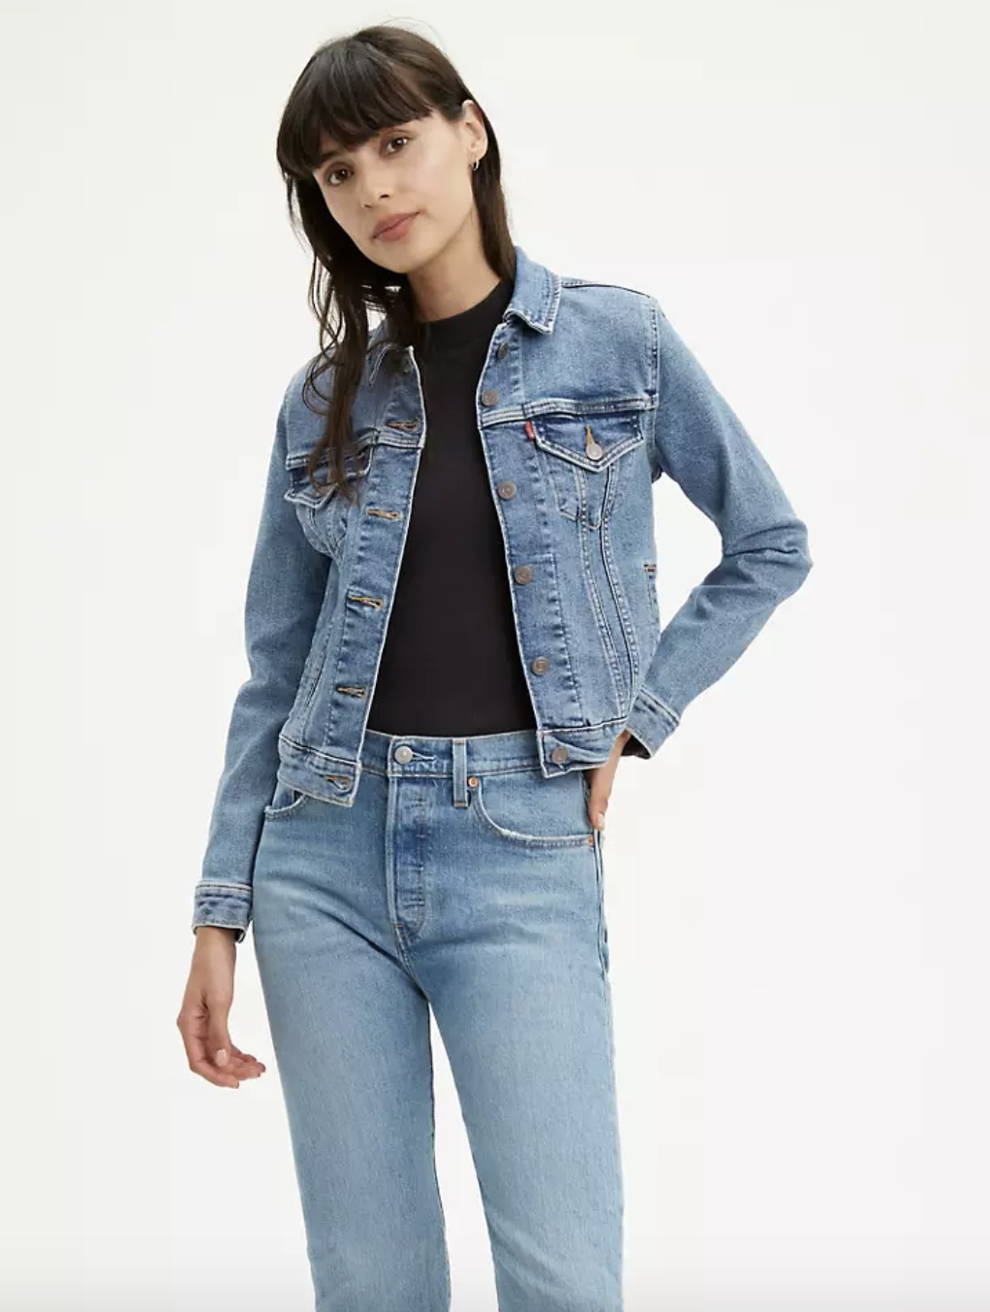 Levi's Massive End-Of-Season Sale Just Launched And It's A Denim-Palooza